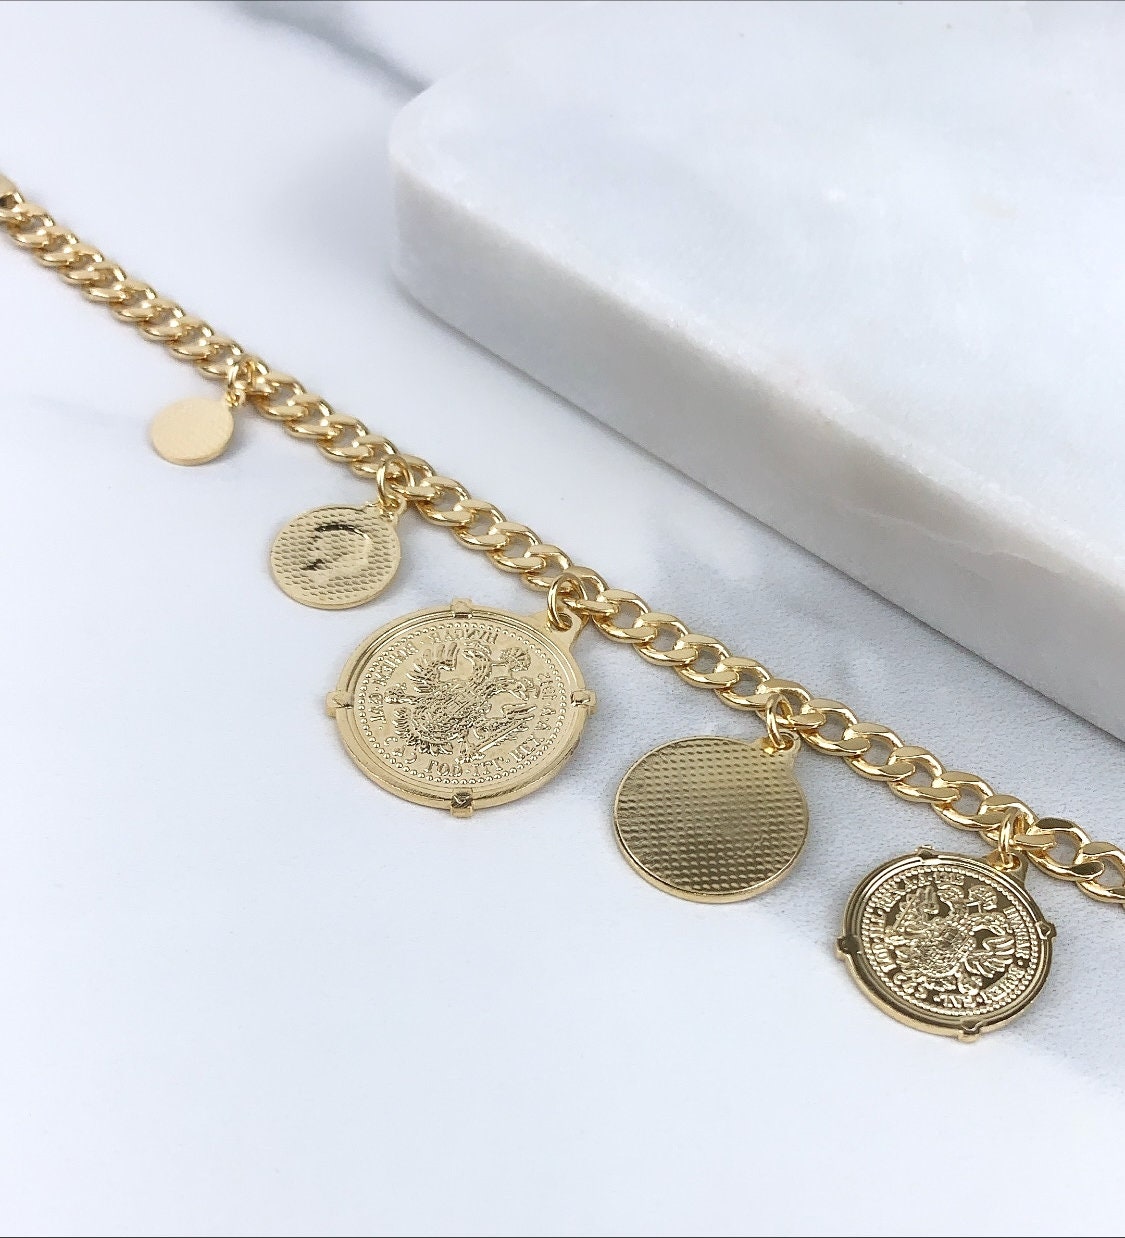 18k Gold Filled American Coins Different Sizes Coins Charm Cuban Chain Link, Bracelet  For Wholesale and Jewelry Supplies